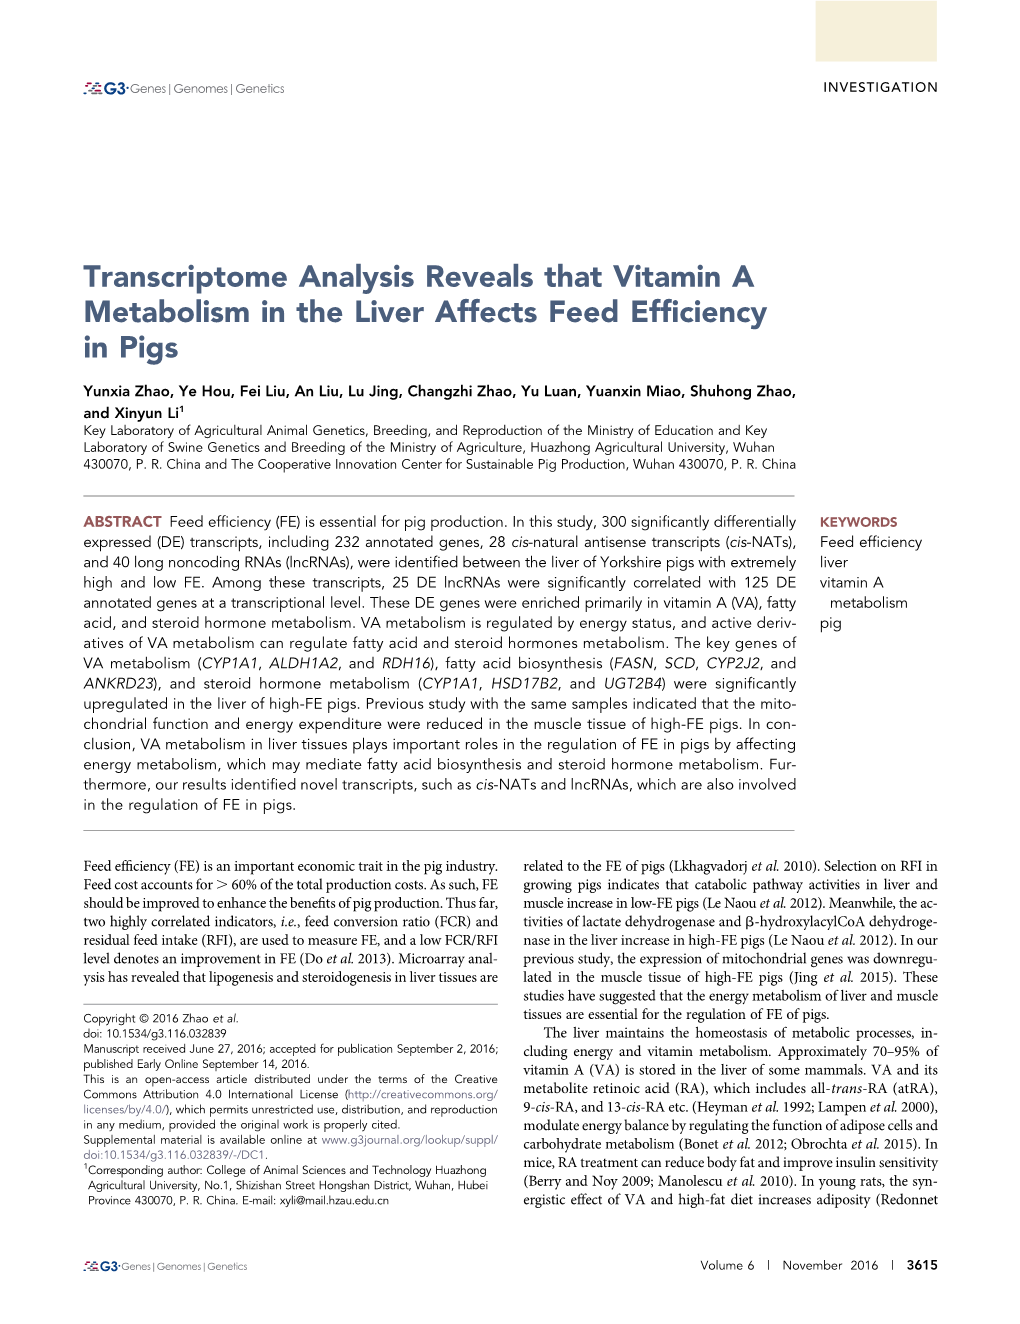 Transcriptome Analysis Reveals That Vitamin a Metabolism in the Liver Affects Feed Efﬁciency in Pigs